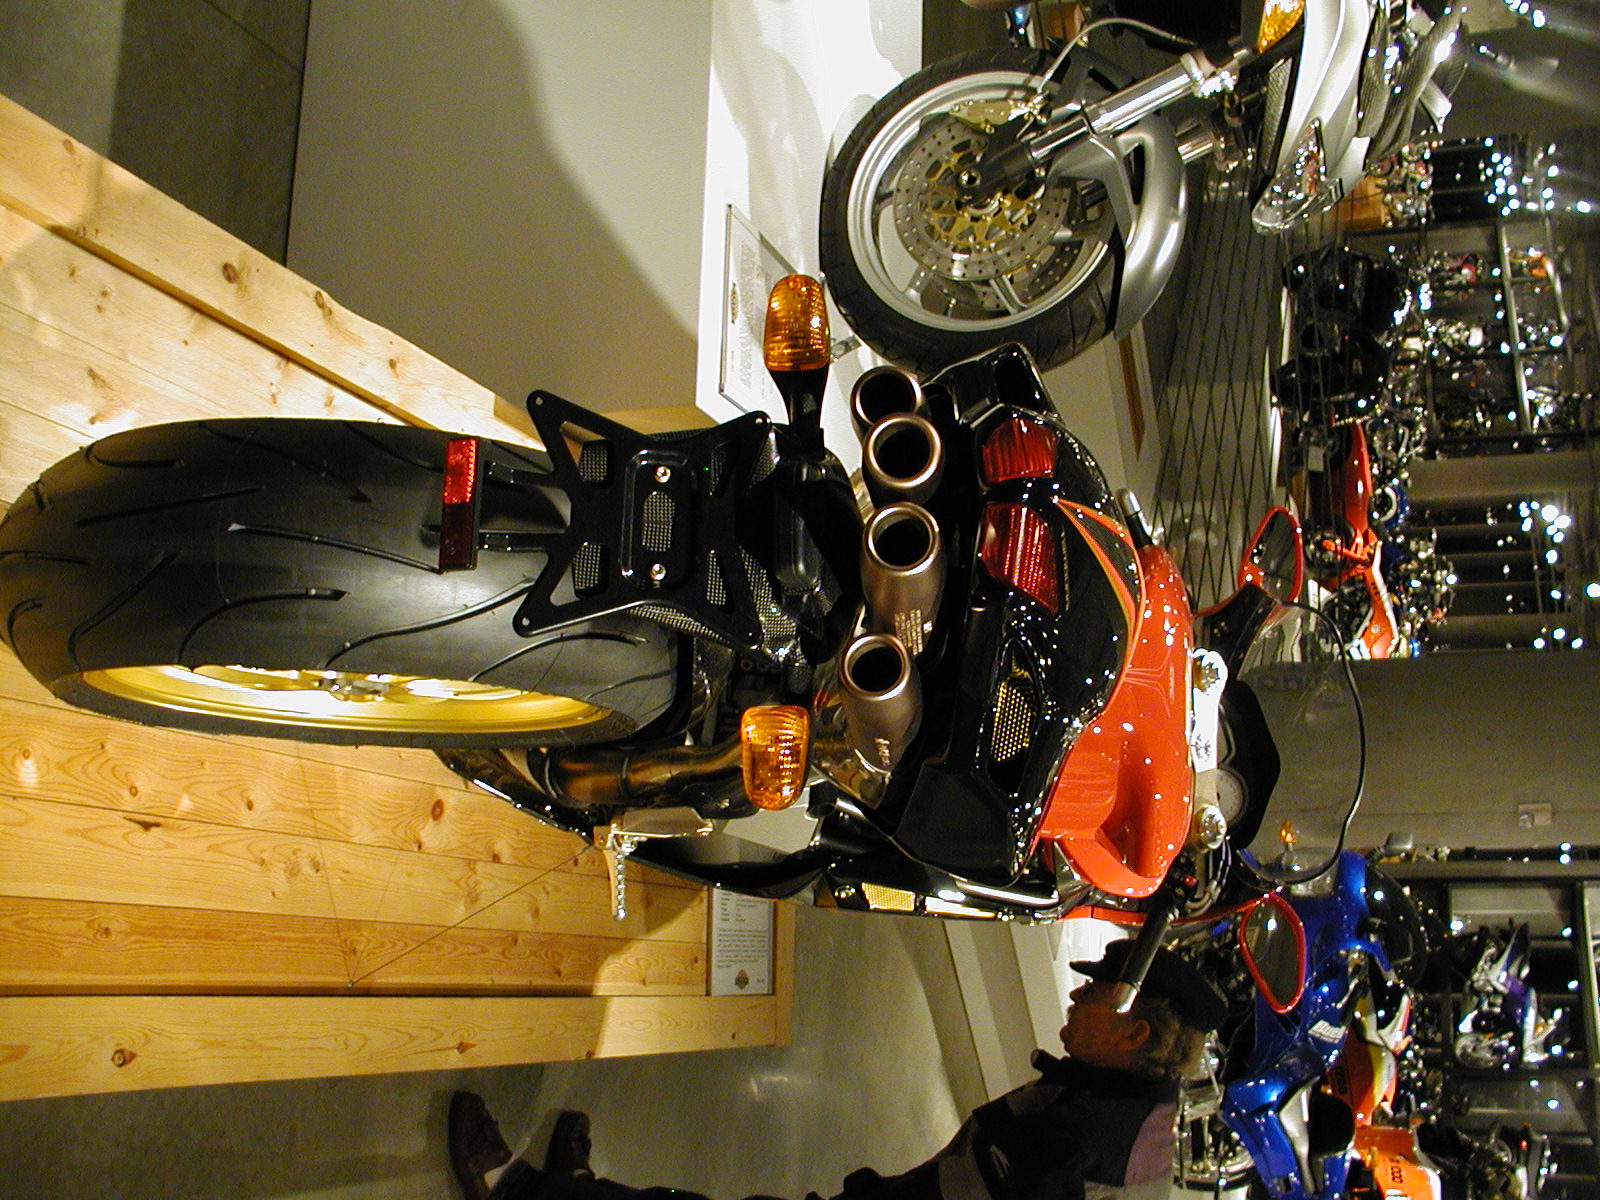 a motorcycle with motor wheels is attached to the wall